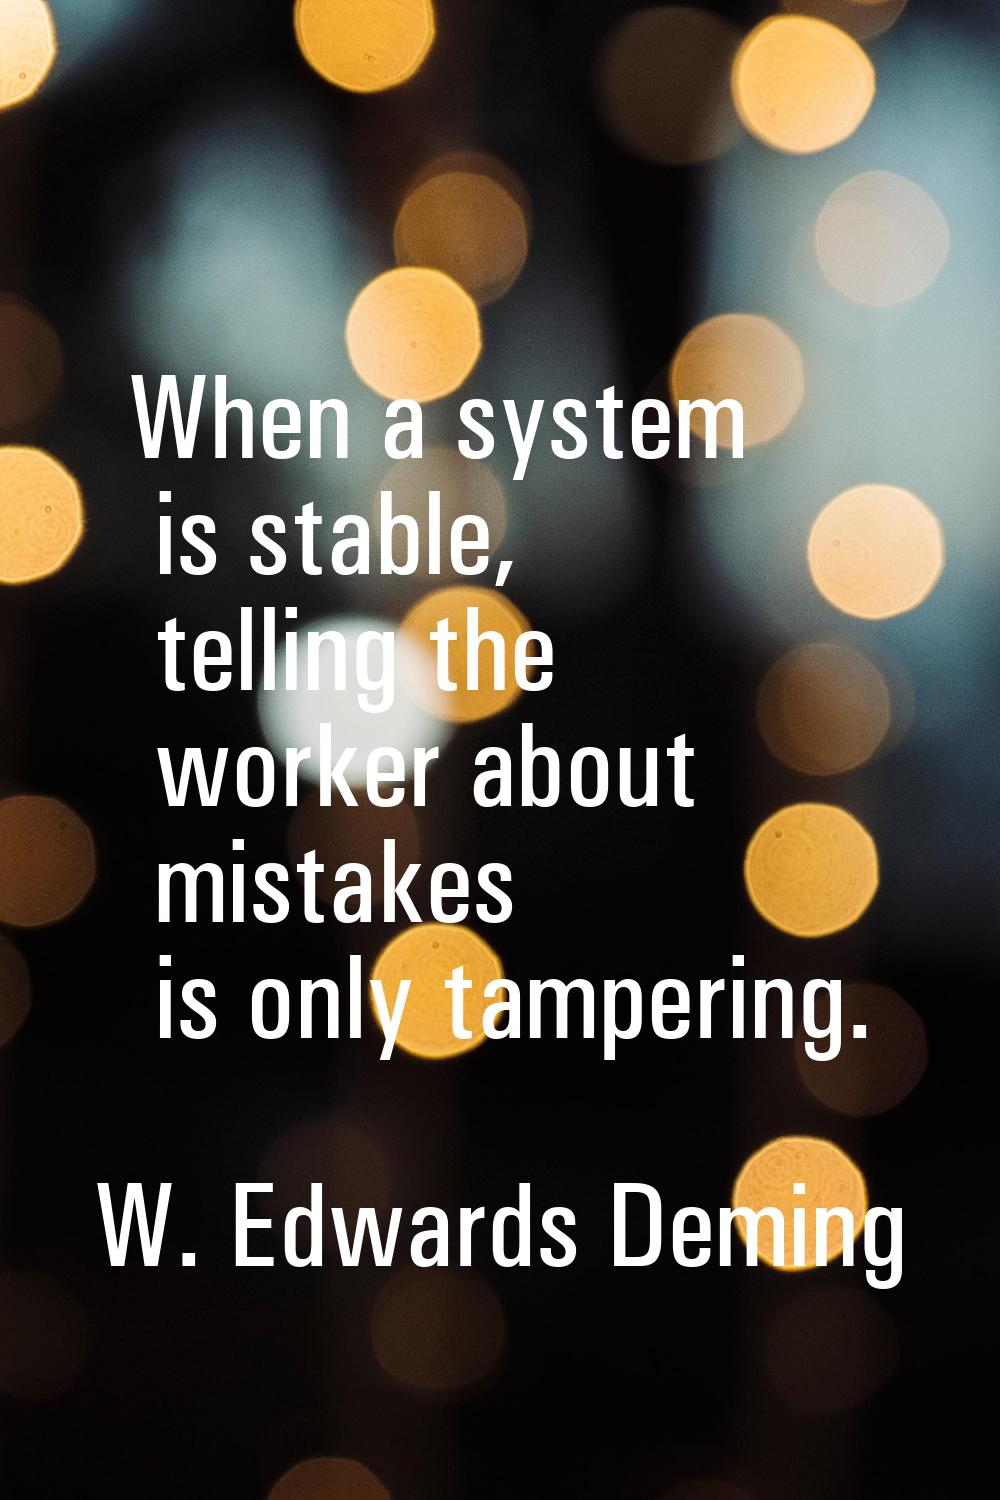 When a system is stable, telling the worker about mistakes is only tampering.